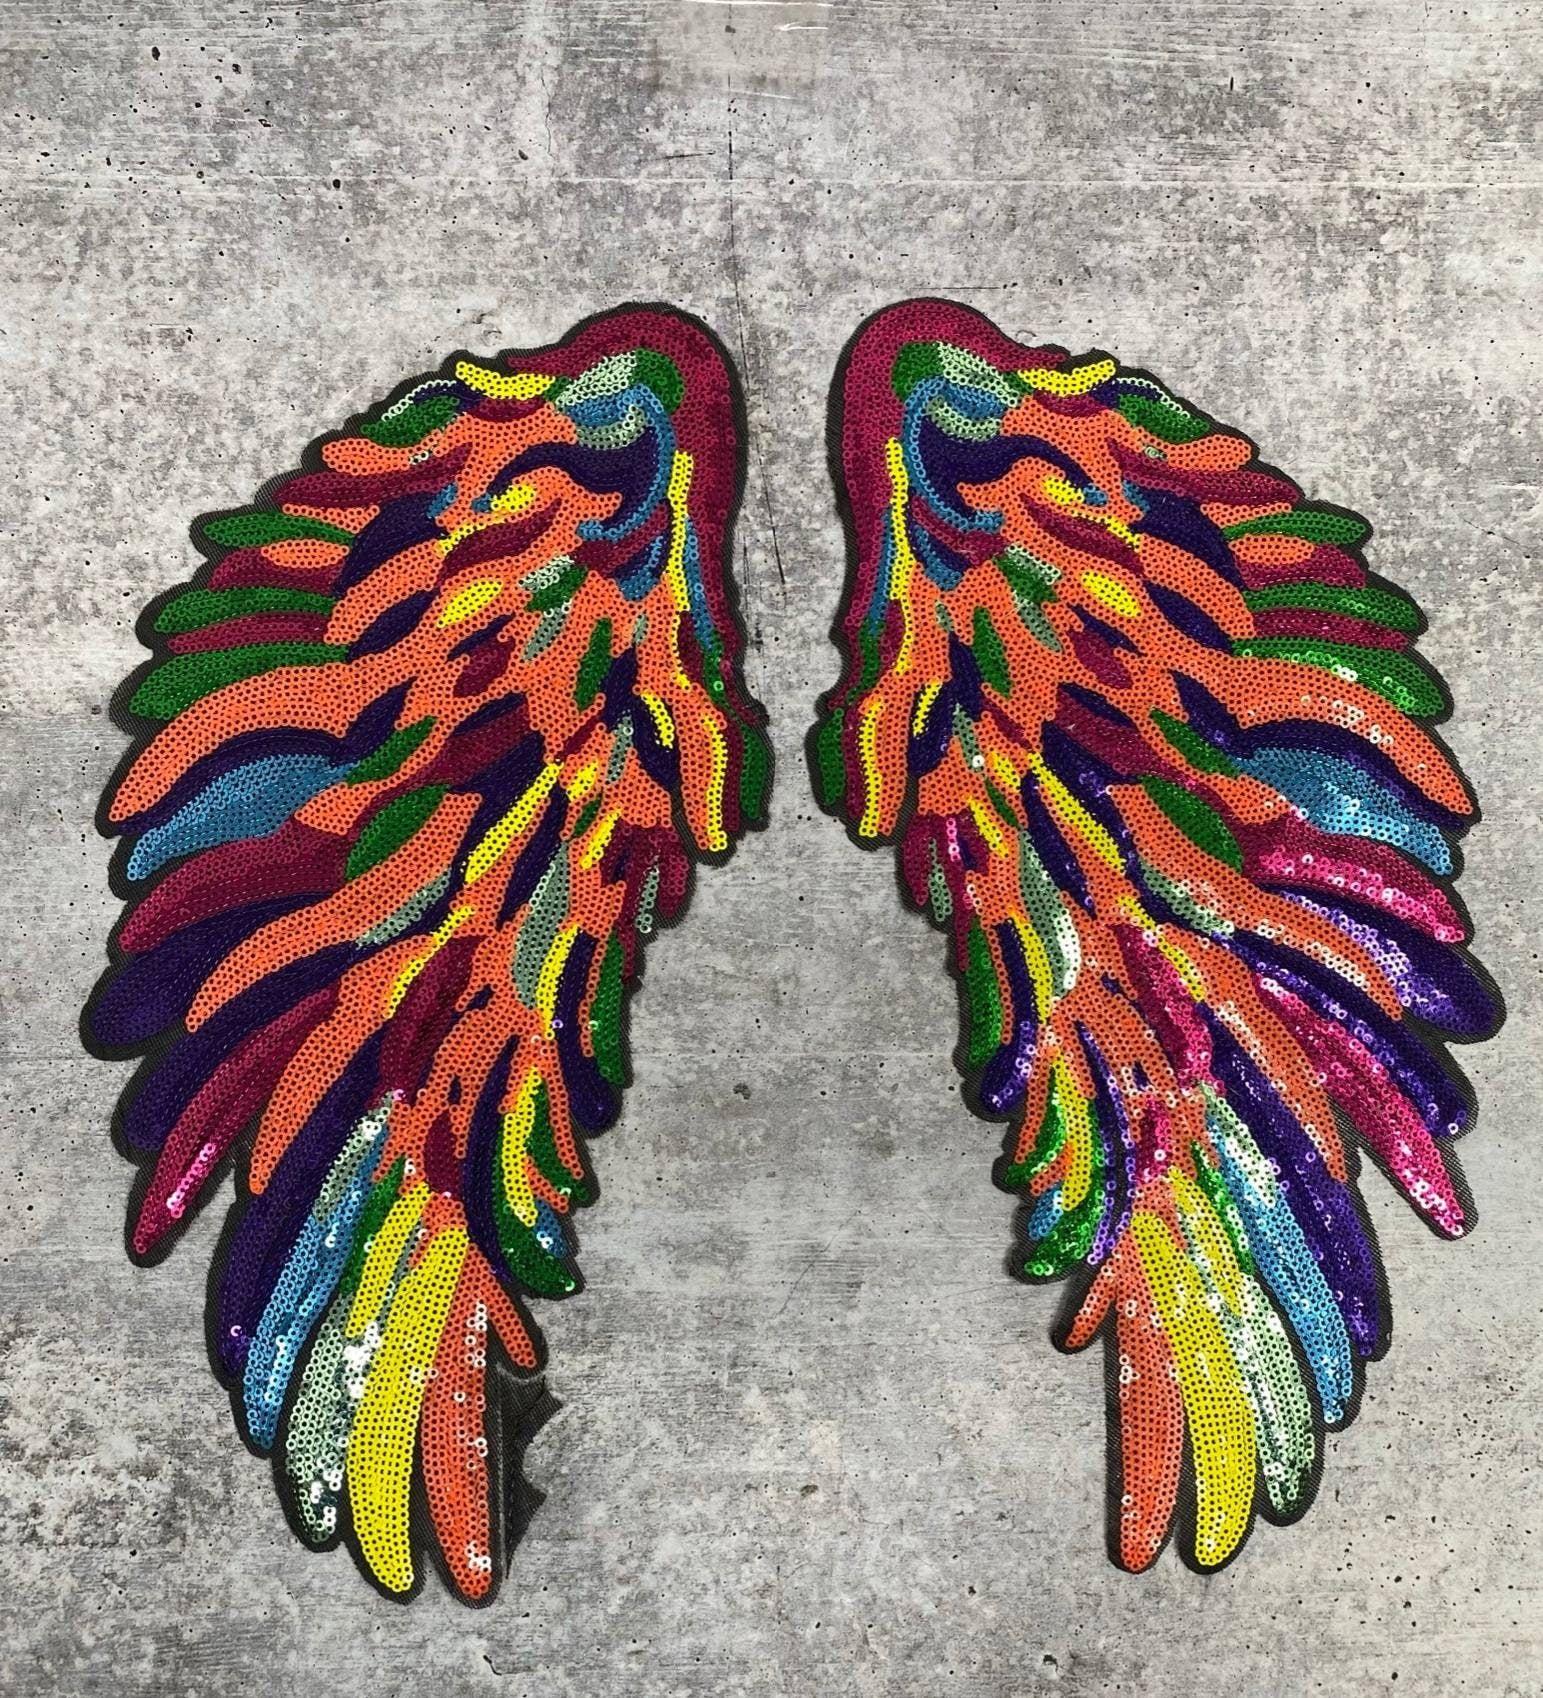 Multi-Color "Orange Kaleidoscope" Exclusive Sequins Angel Wings, Large Wings (iron-on) Size 10"x5.5", Sparkly Patch for Denim Jacket, Shirts